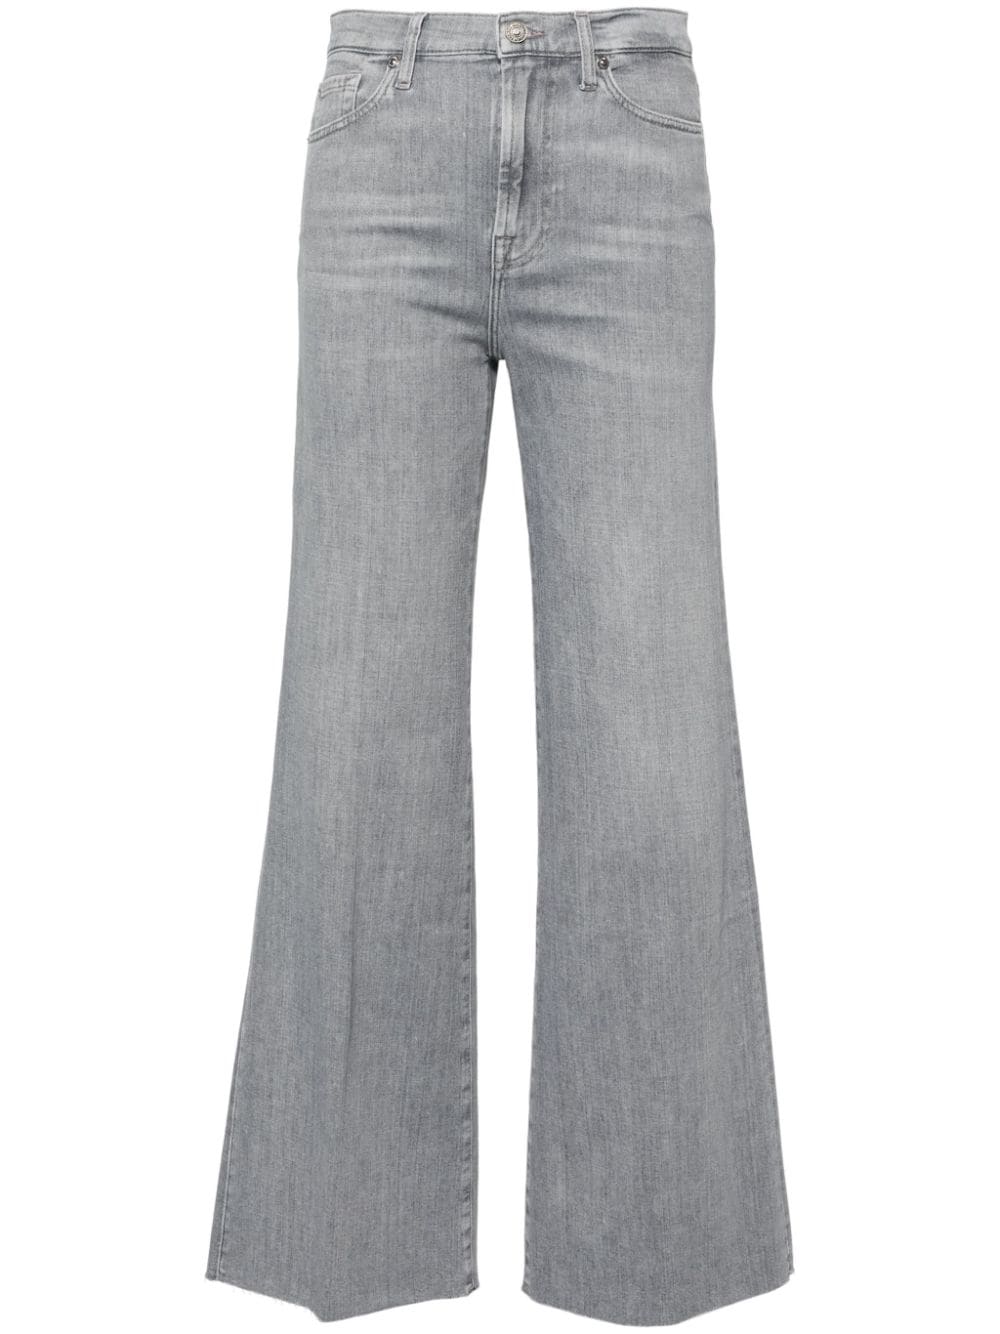 7 For All Mankind Modern Dojo flared jeans - Grey von 7 For All Mankind